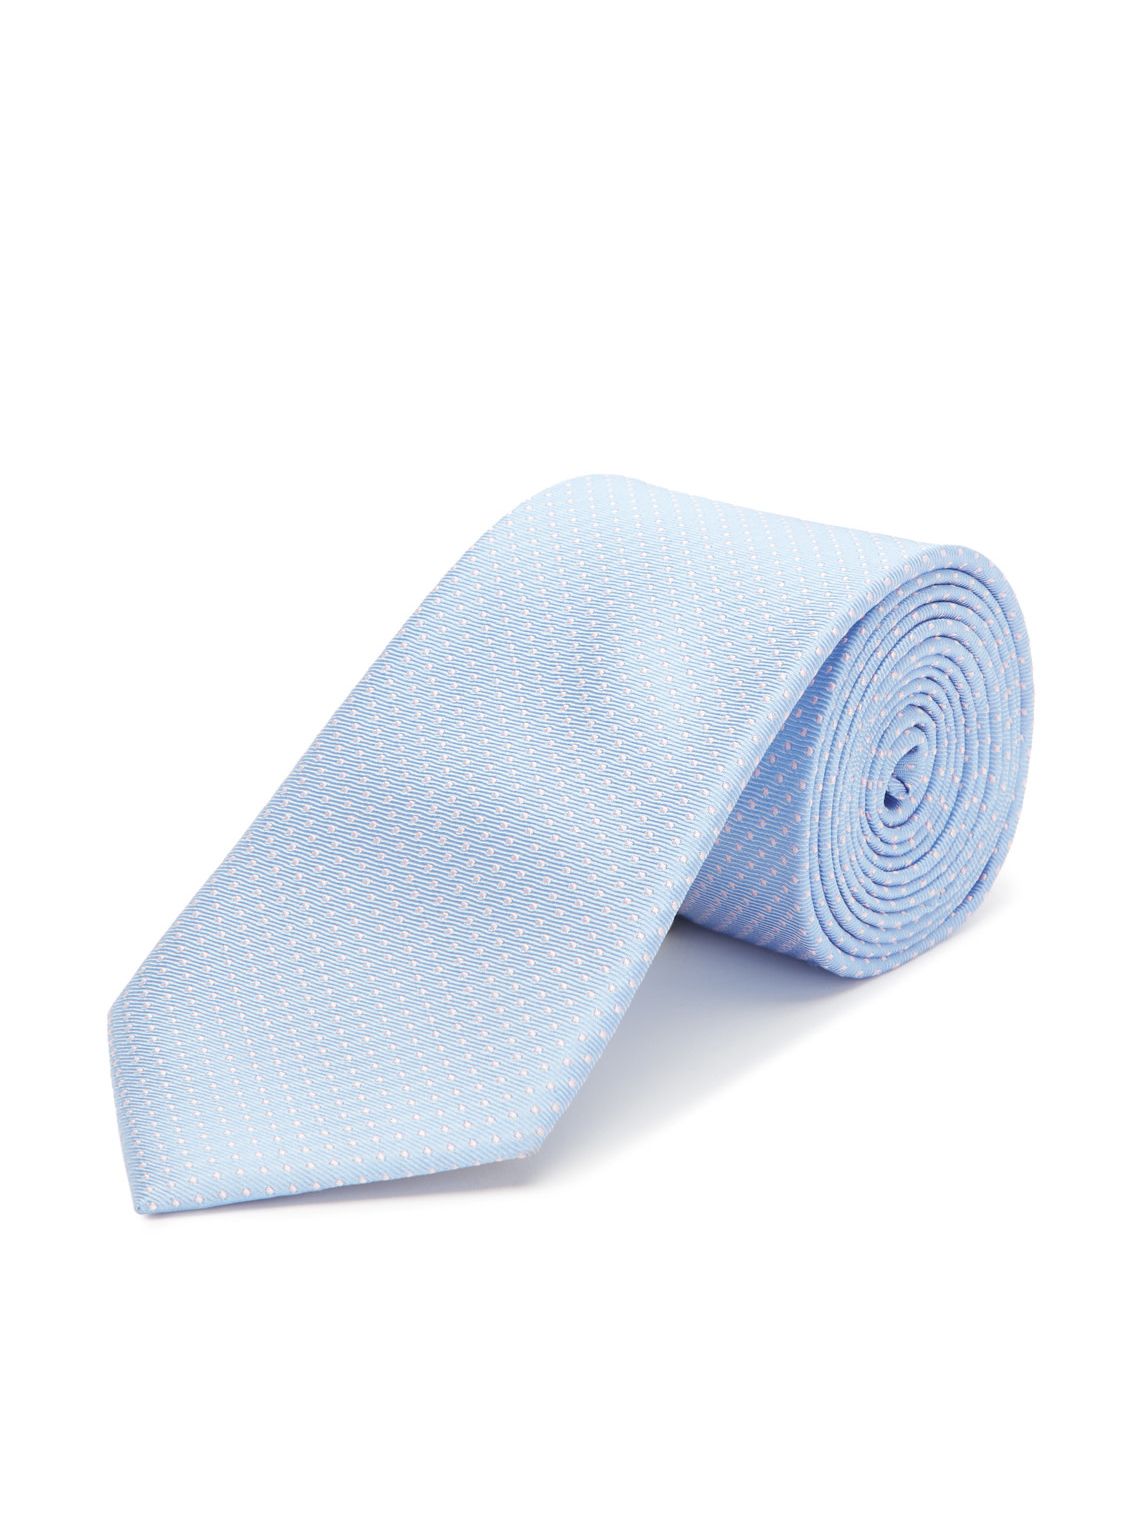 Woven Silk Tie, Spotted - Pale Blue/Pink